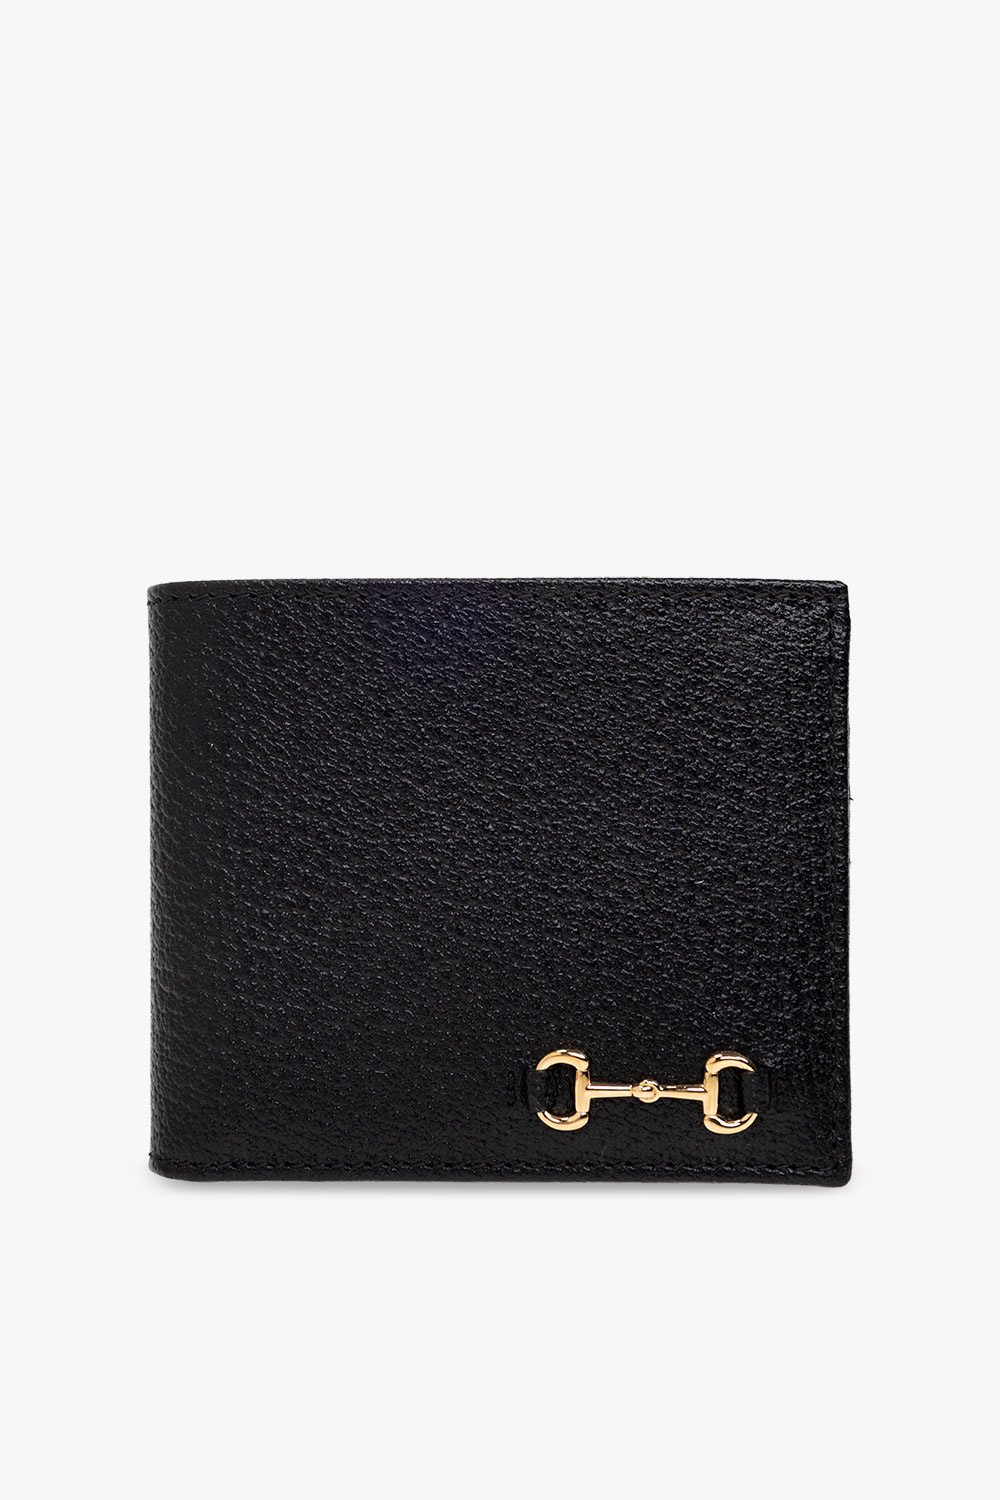 Gucci Leather bifold wallet